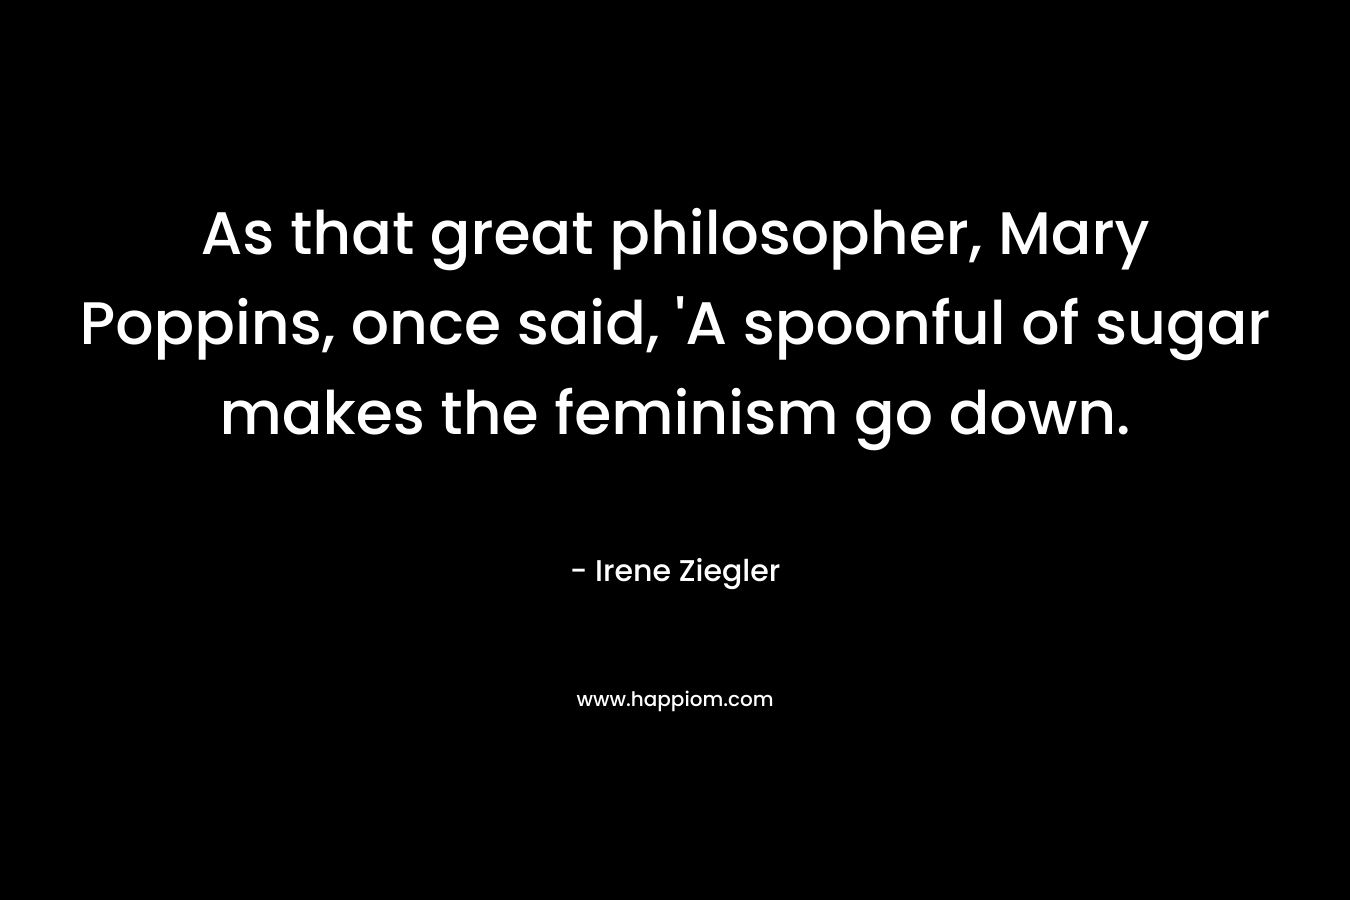 As that great philosopher, Mary Poppins, once said, ‘A spoonful of sugar makes the feminism go down. – Irene Ziegler